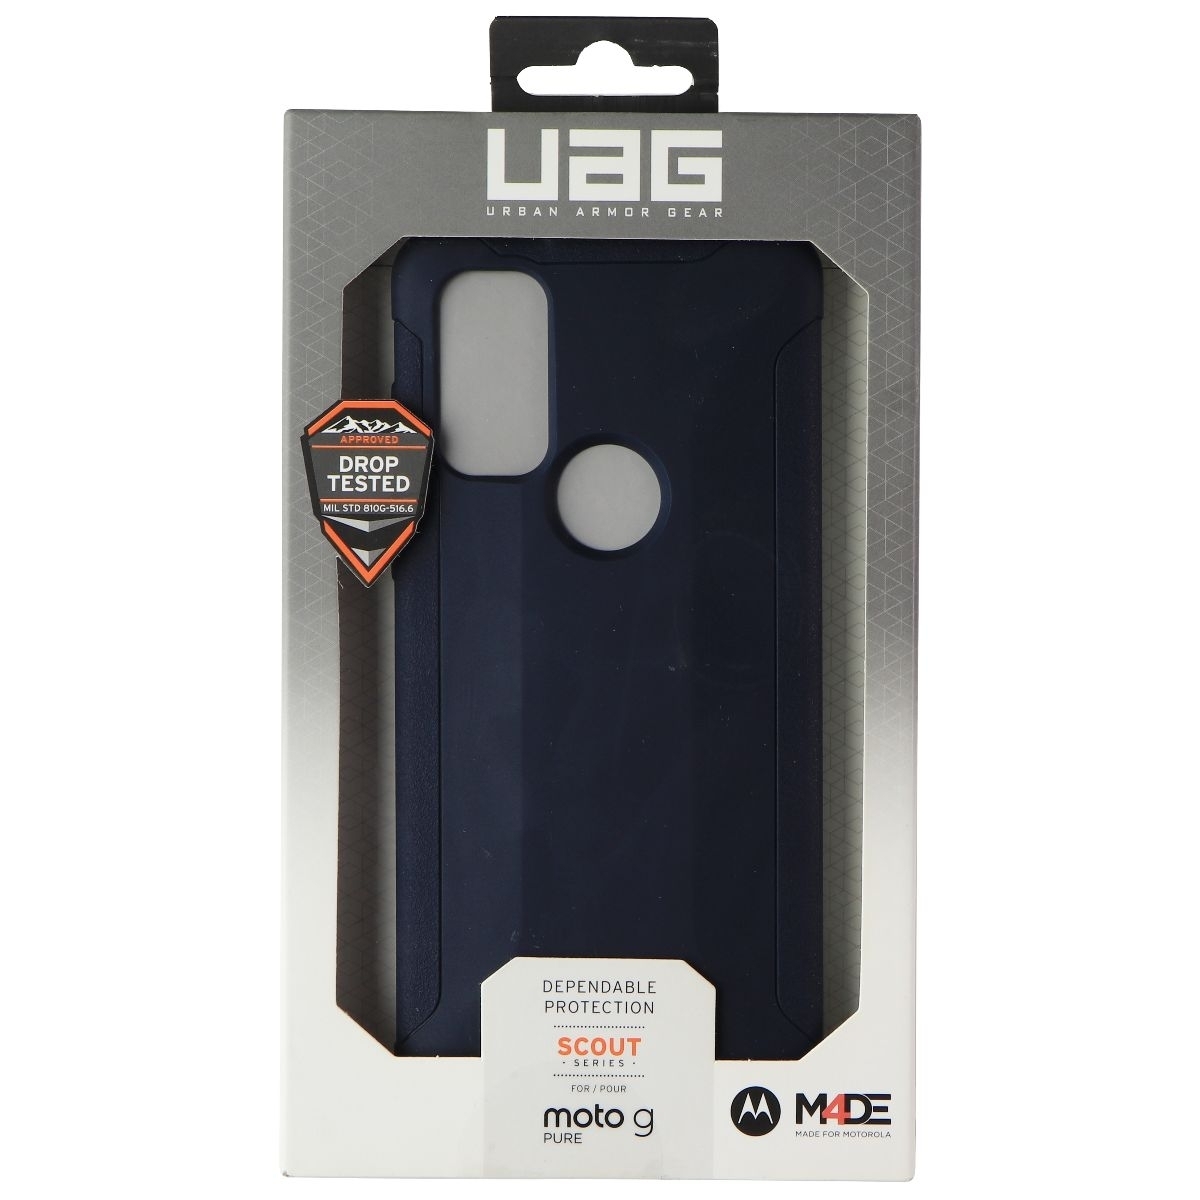 Urban Armor Gear UAG Scout Series Case For Moto G Pure - Blue (Refurbished)